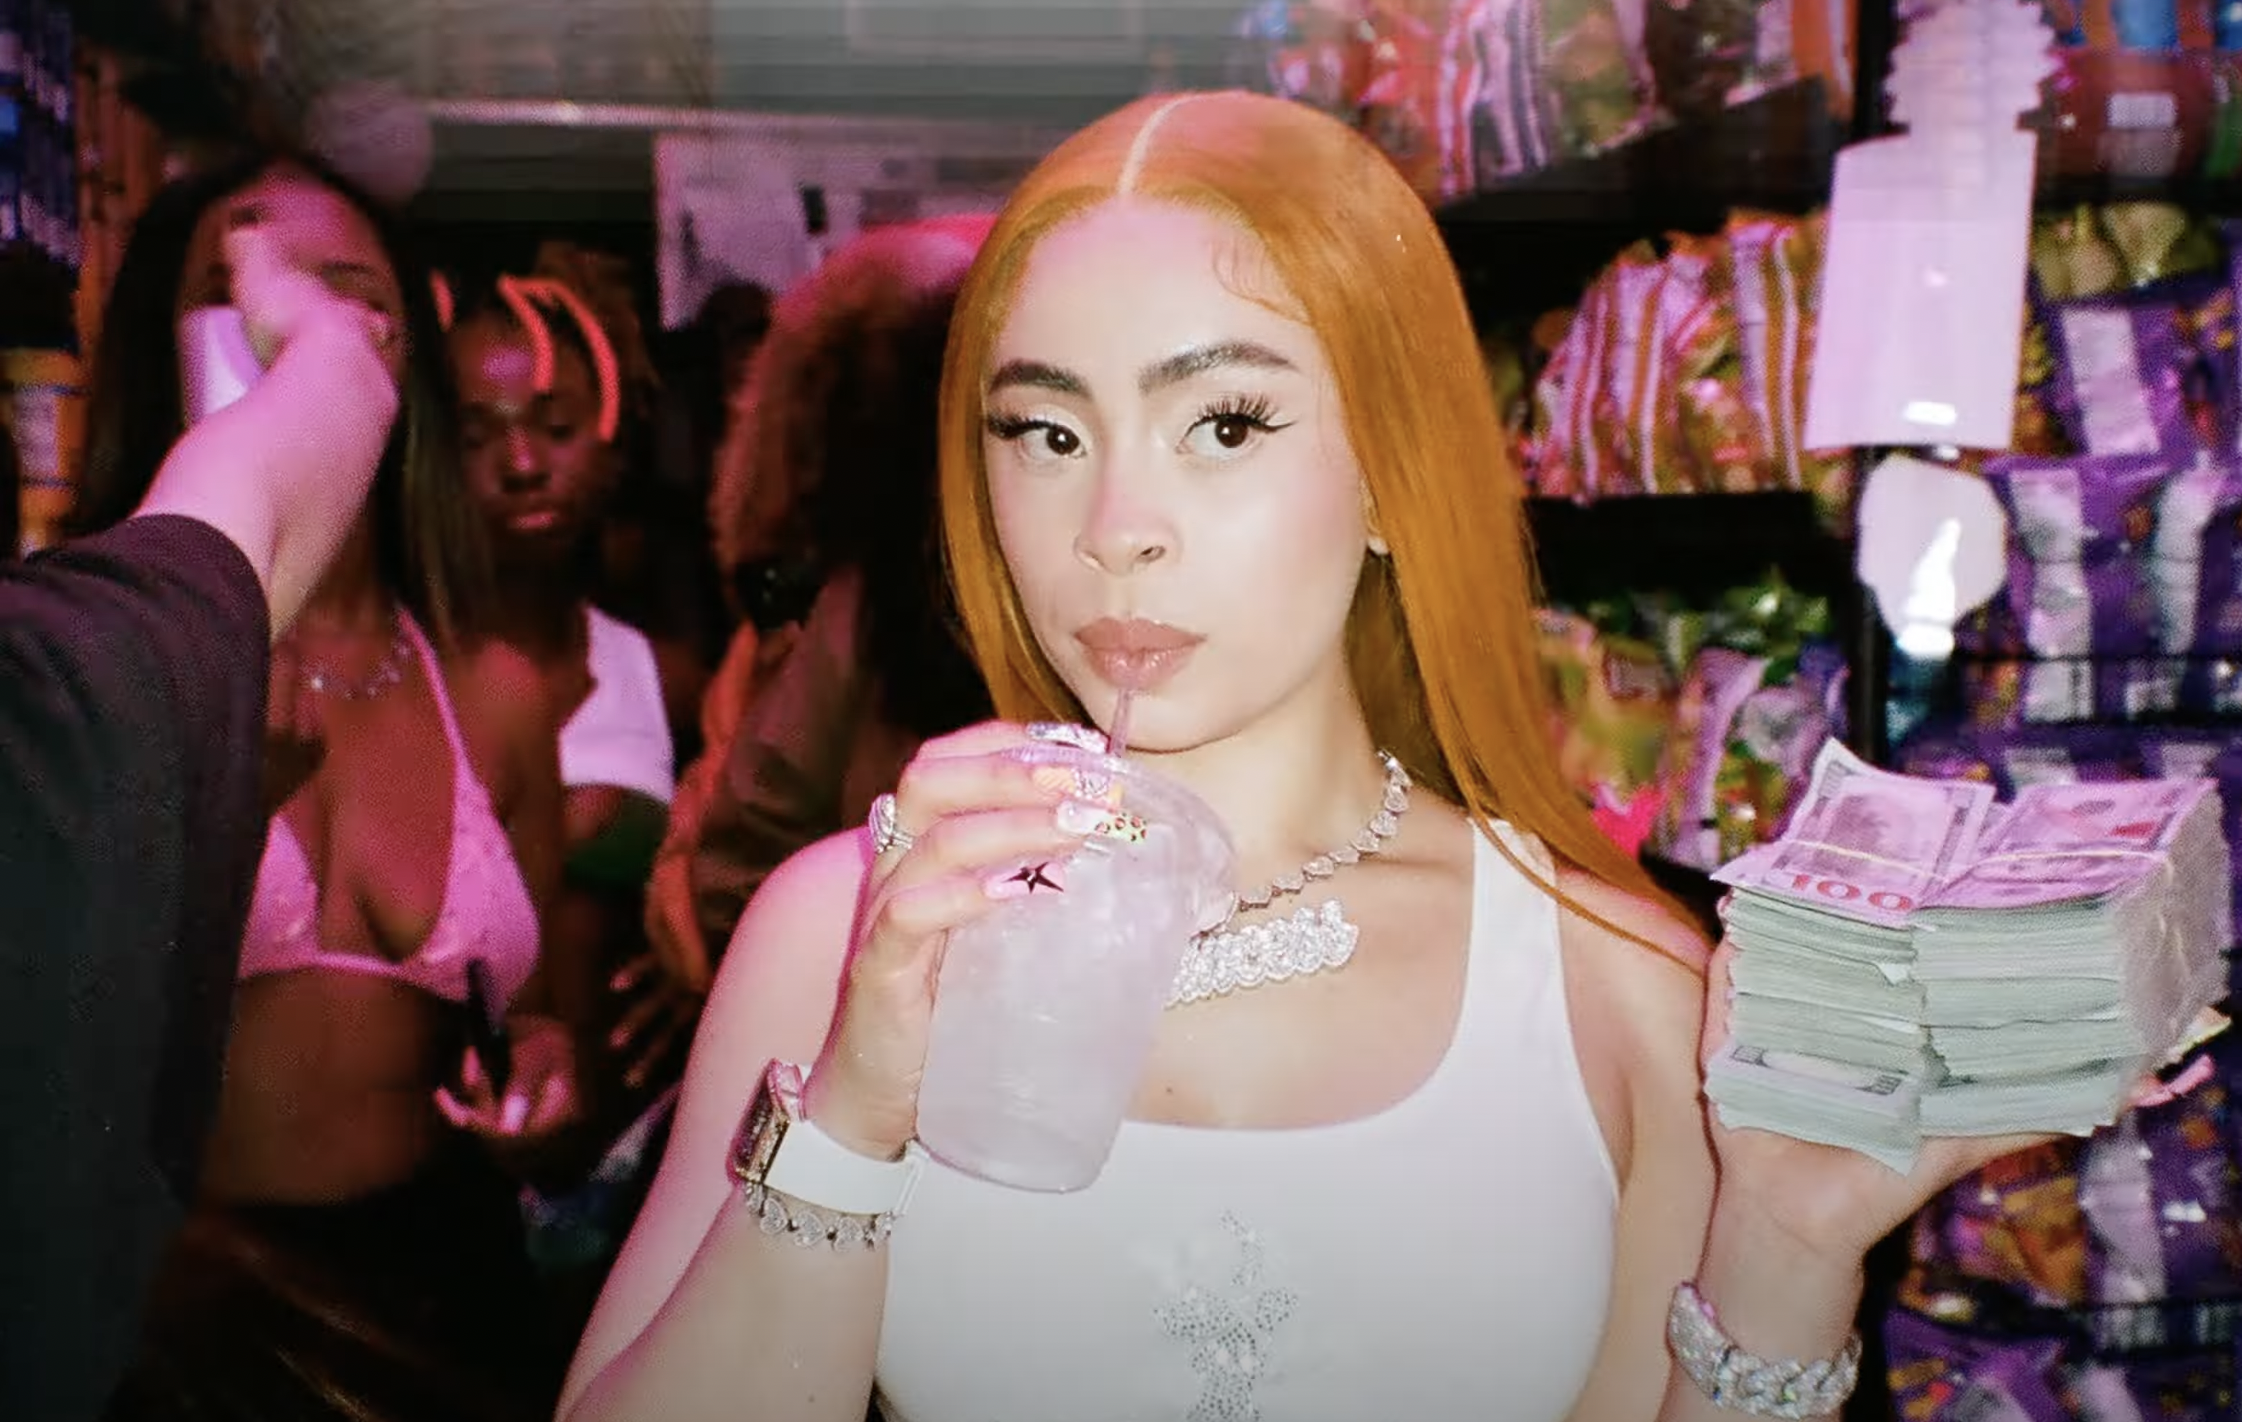 Ice Spice Shakes A** In A “Deli” In Her Latest Music Video: Watch